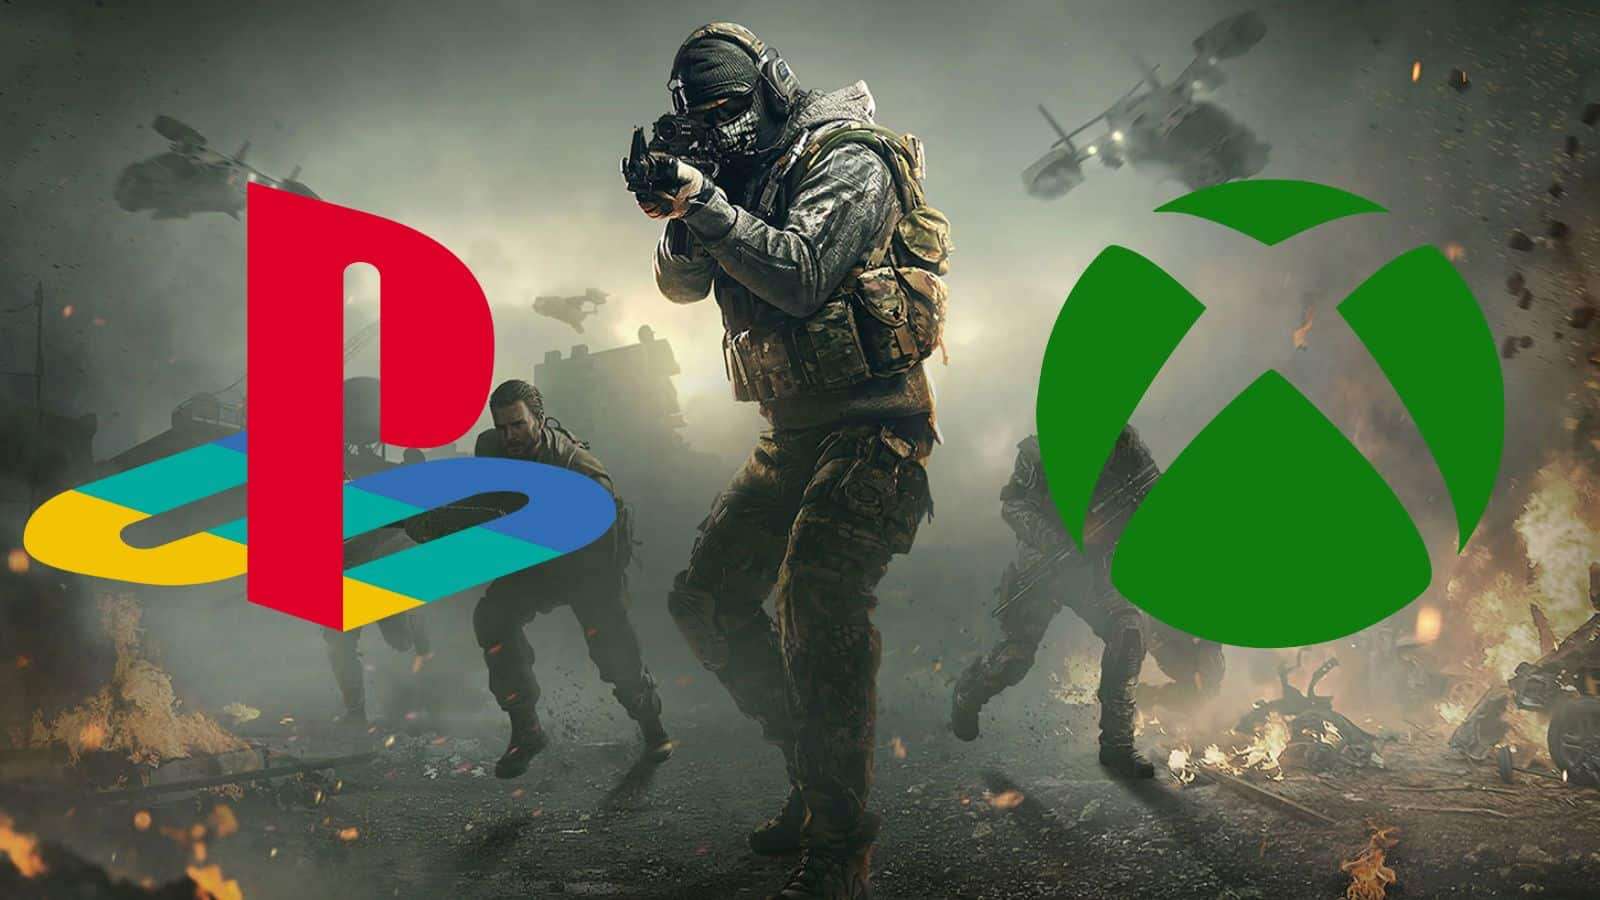 Call of duty cover with the Playstation and Xbox logo